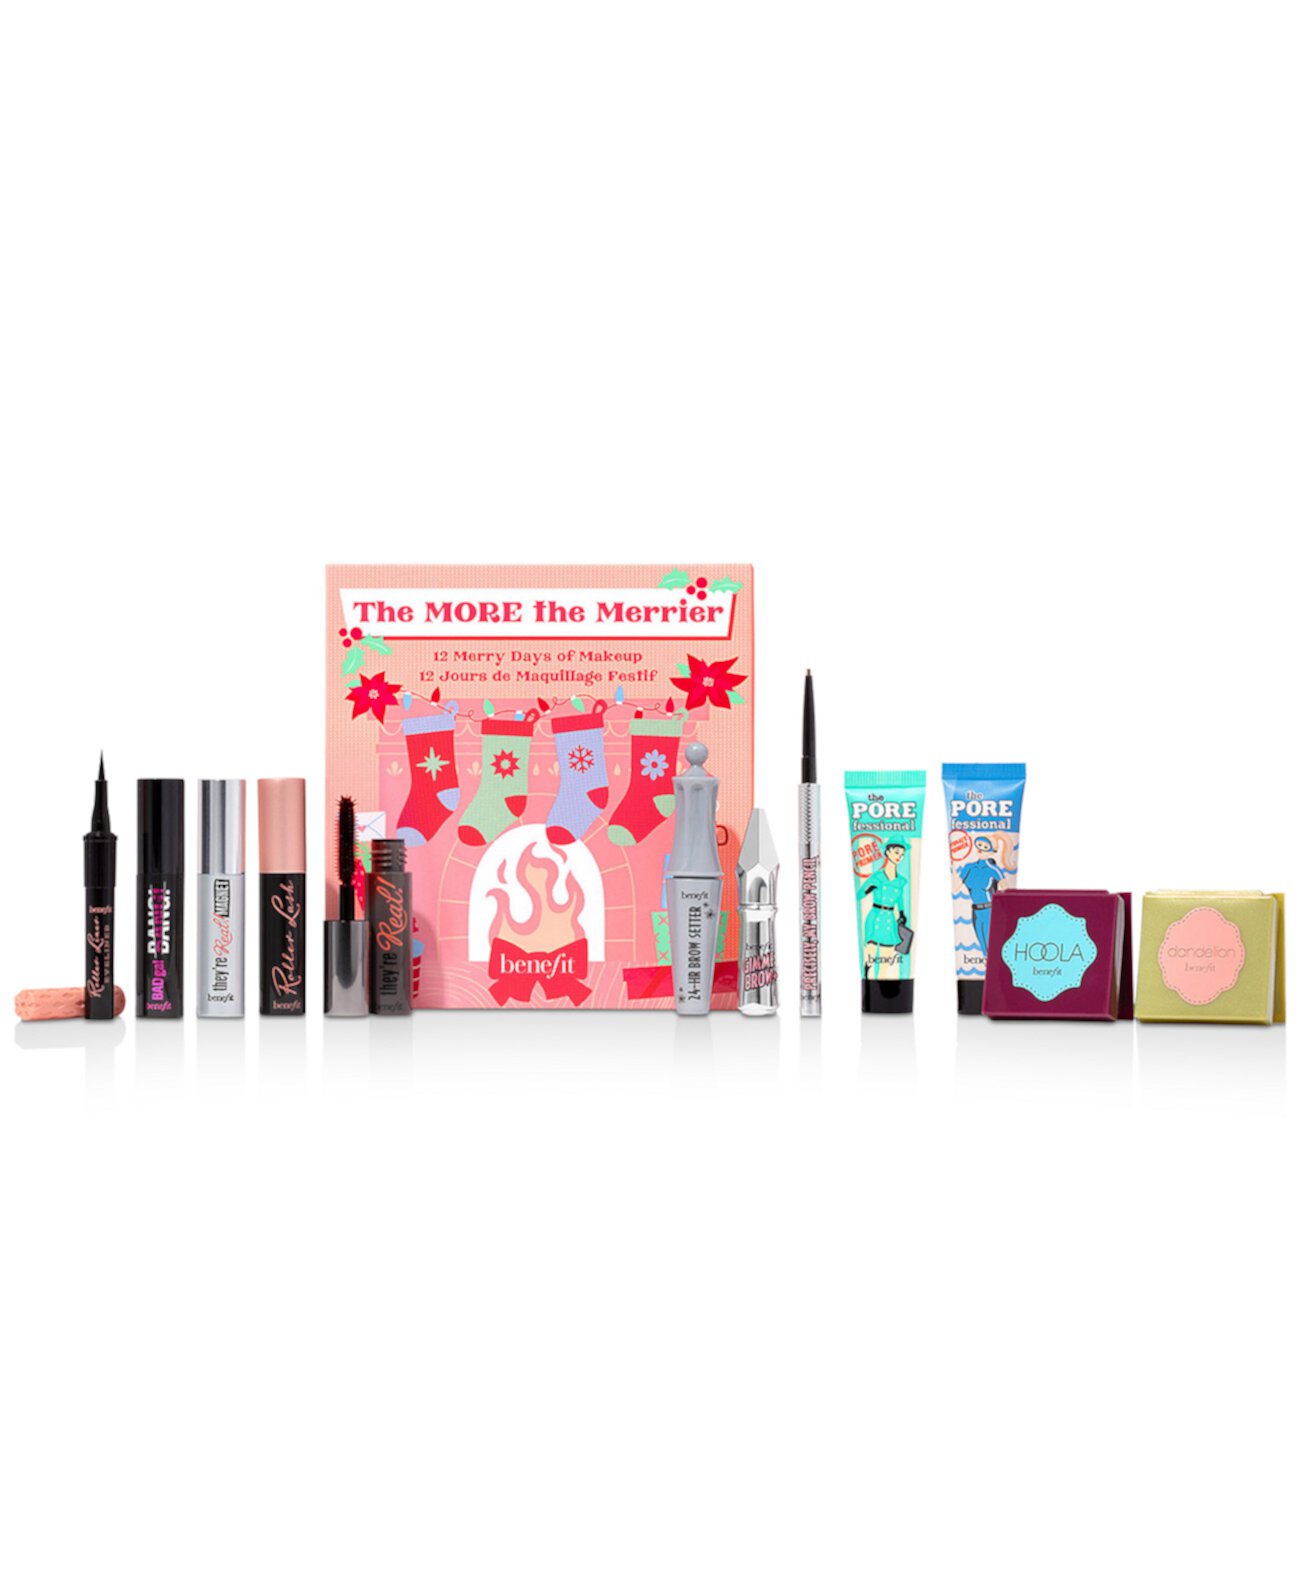 12-шт. Набор адвент-календаря The More The Merrier Beauty Benefit Cosmetics